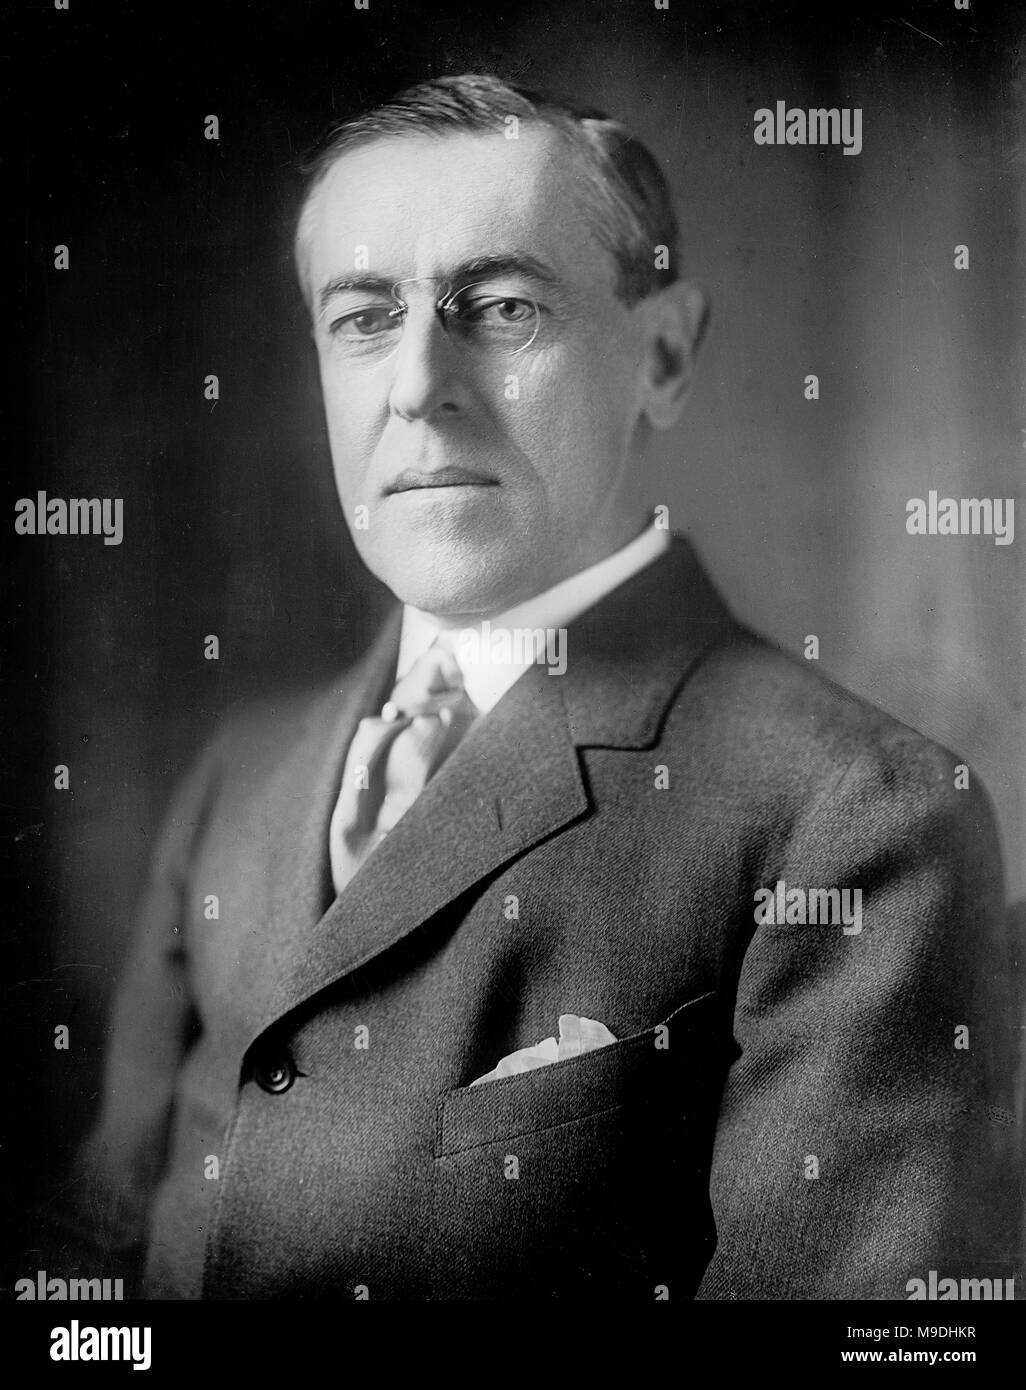 Woodrow Wilson, Thomas Woodrow Wilson (1856 – 1924) American statesman and 28th President of the United States from 1913 to 1921. Stock Photo